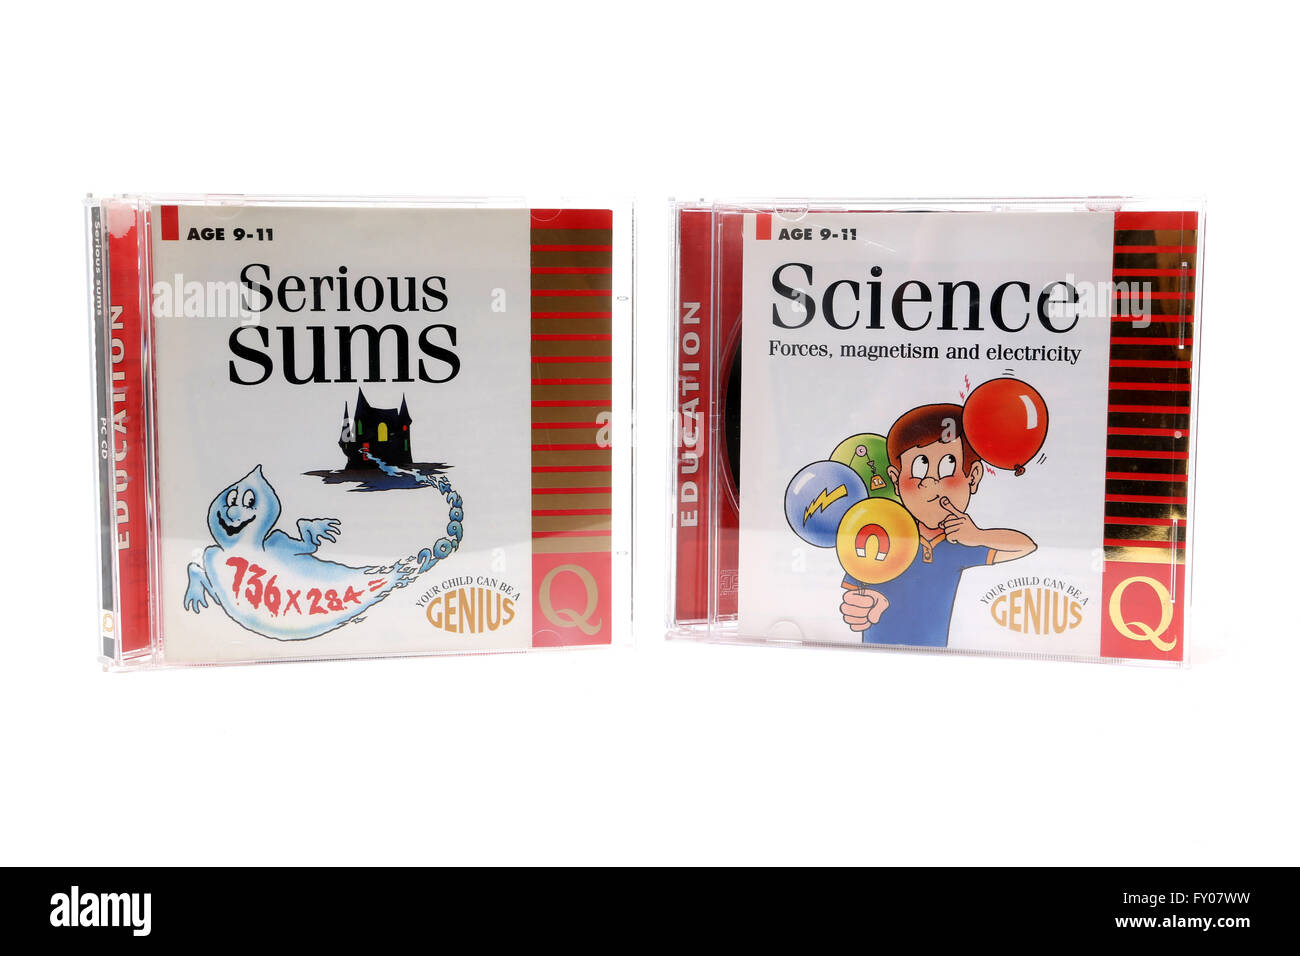 Educational CDs Serious Sums And Science Stock Photo